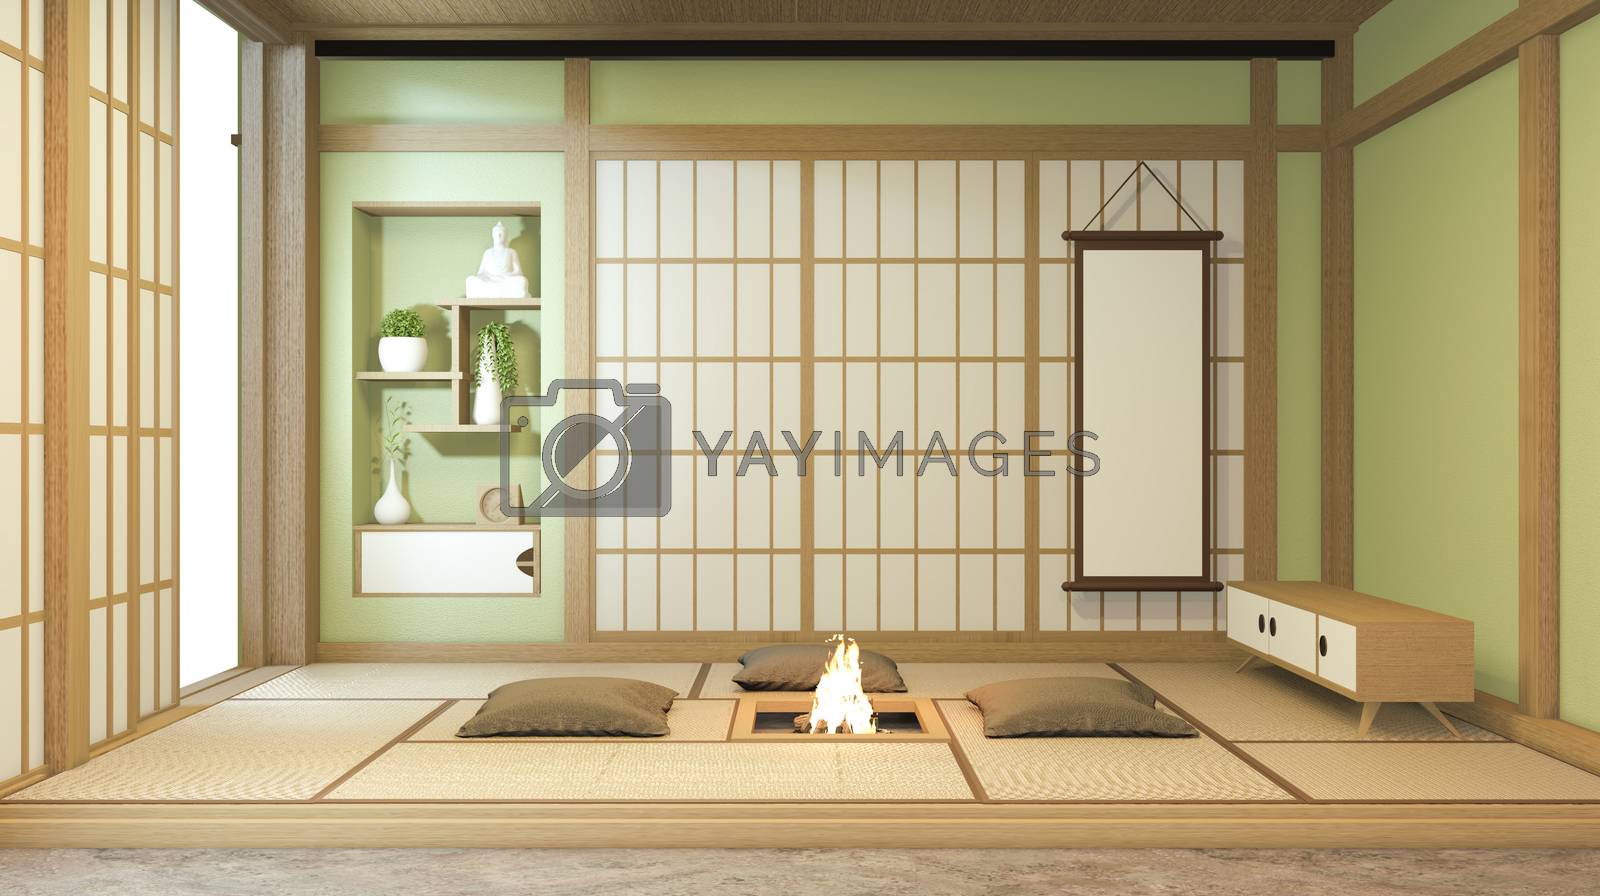 Royalty free image of Nihon green room design interior with door paper and cabinet she by Minny0012011@hotmail.com